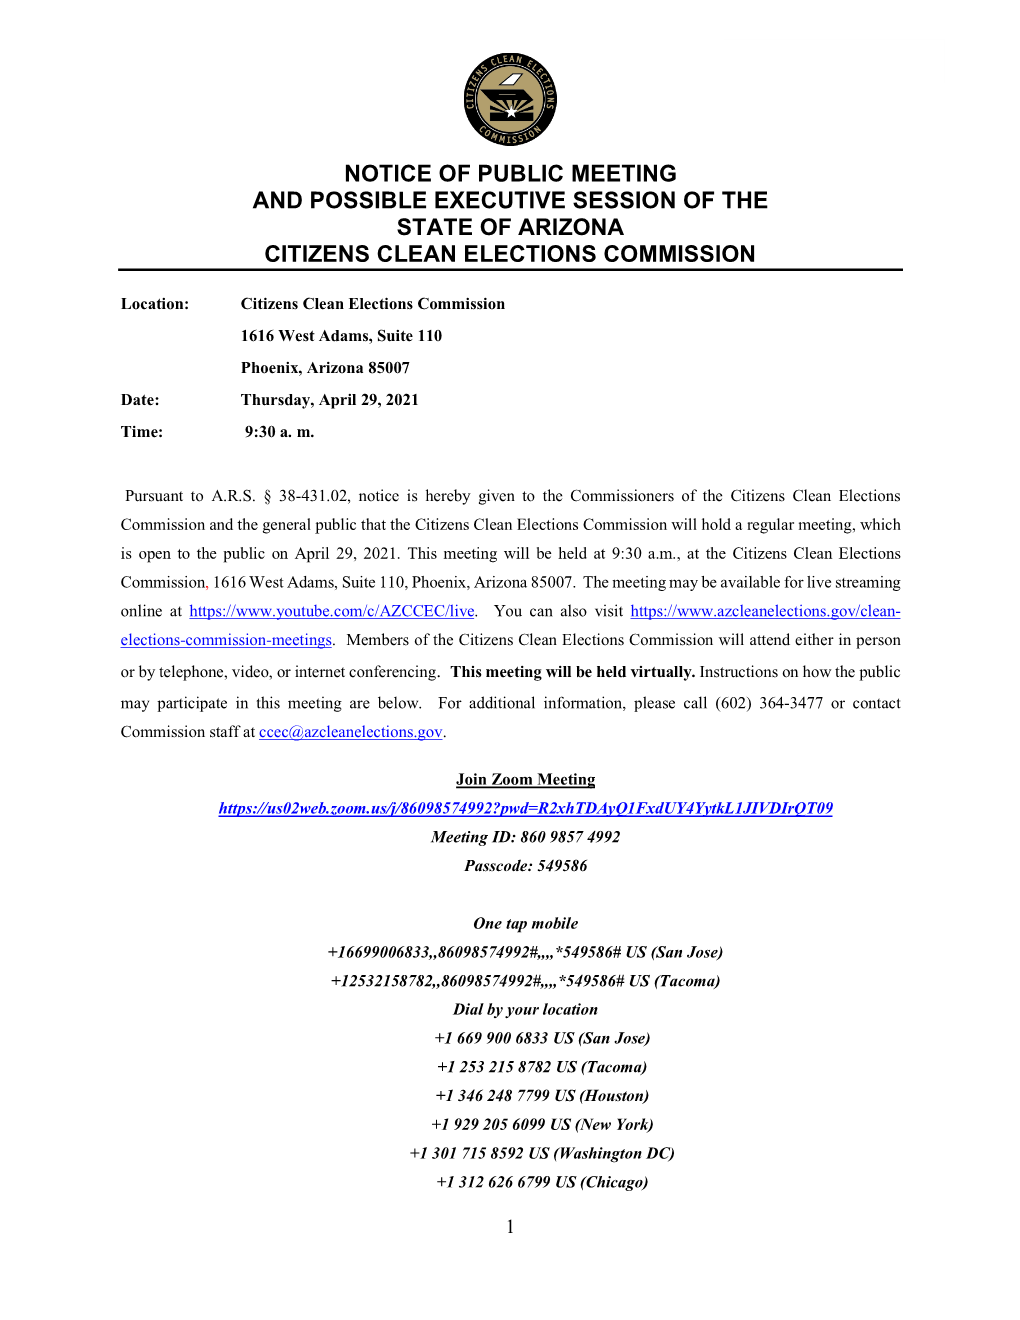 Notice of Public Meeting and Possible Executive Session of the State of Arizona Citizens Clean Elections Commission